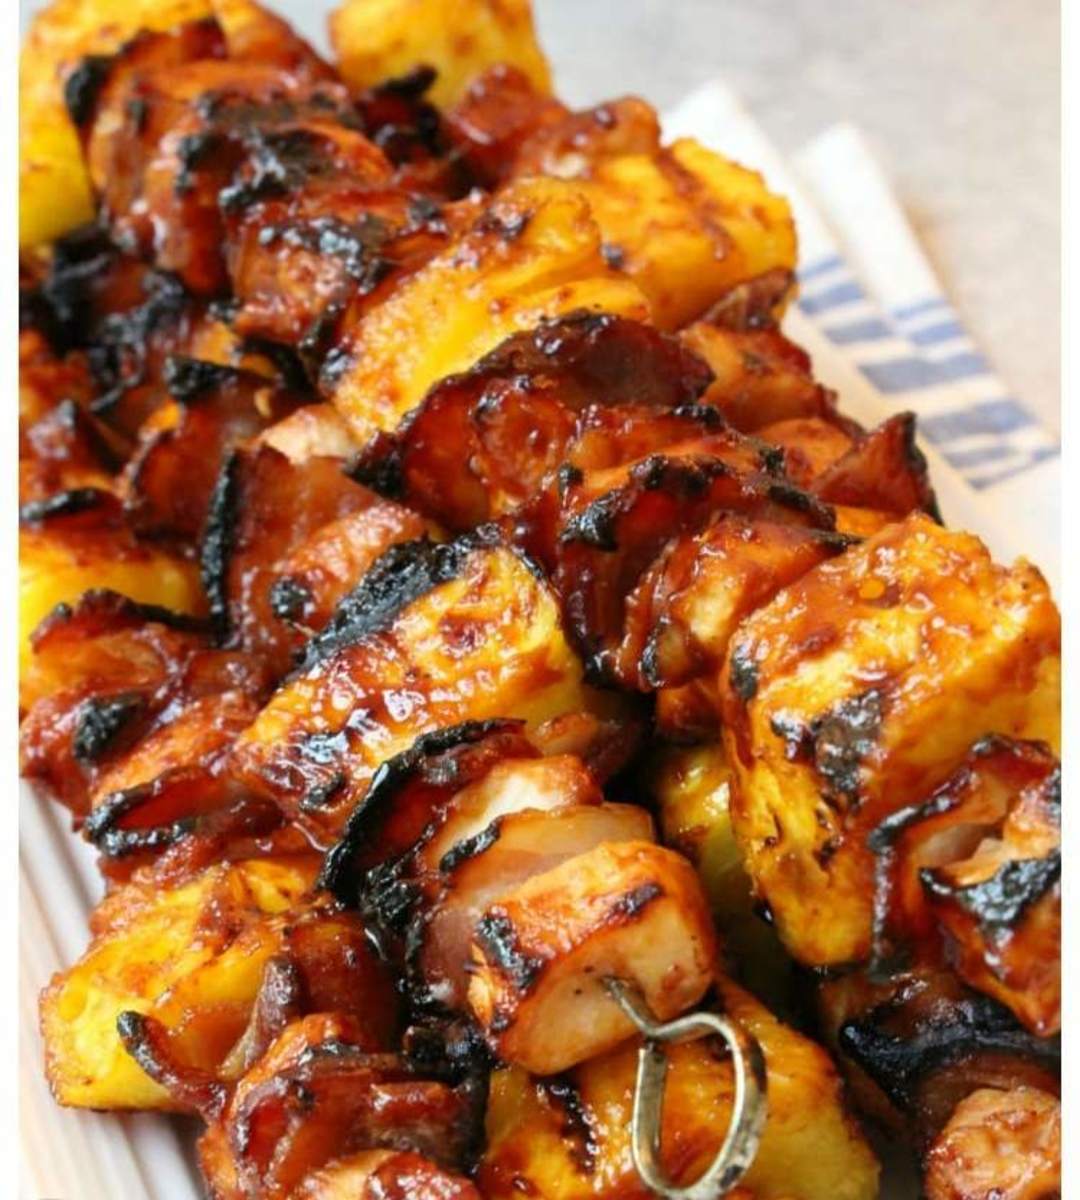 BBQ Chicken Bacon Pineapple Kabobs